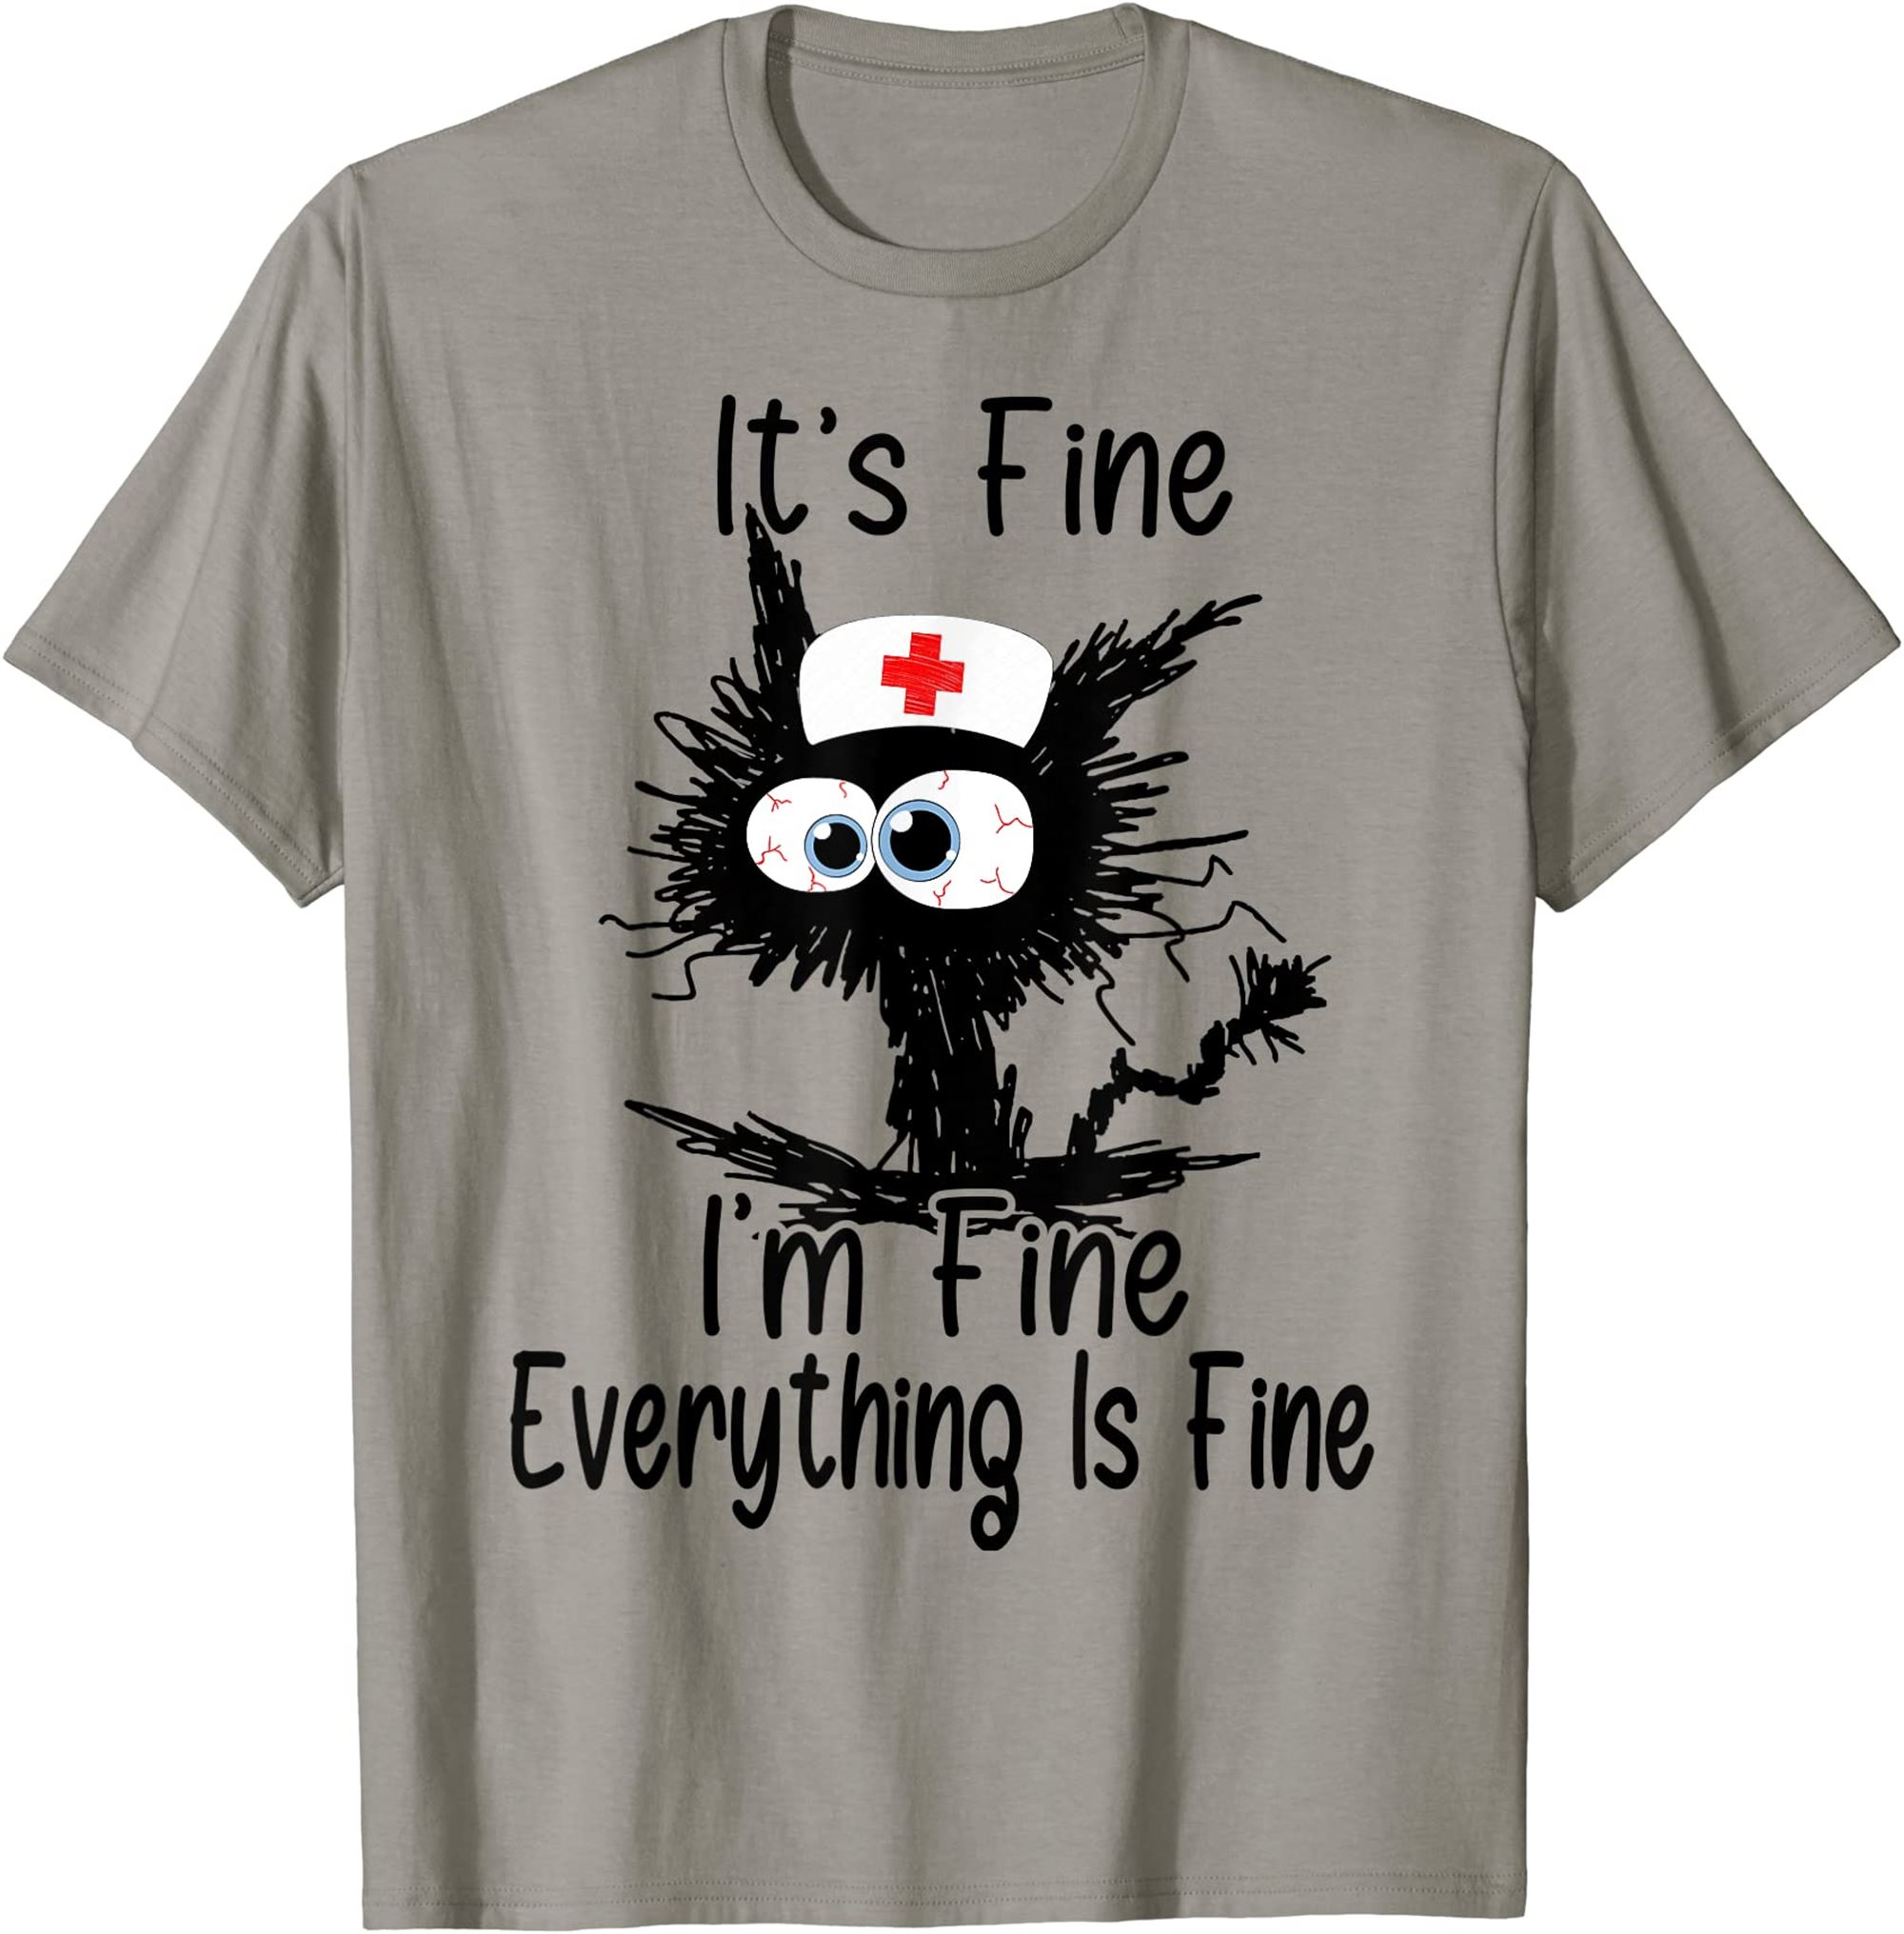 Im Fine Its Fine Everything Is Fine Cna Life Funny Nurse T-shirt Full Size Up To 5xl